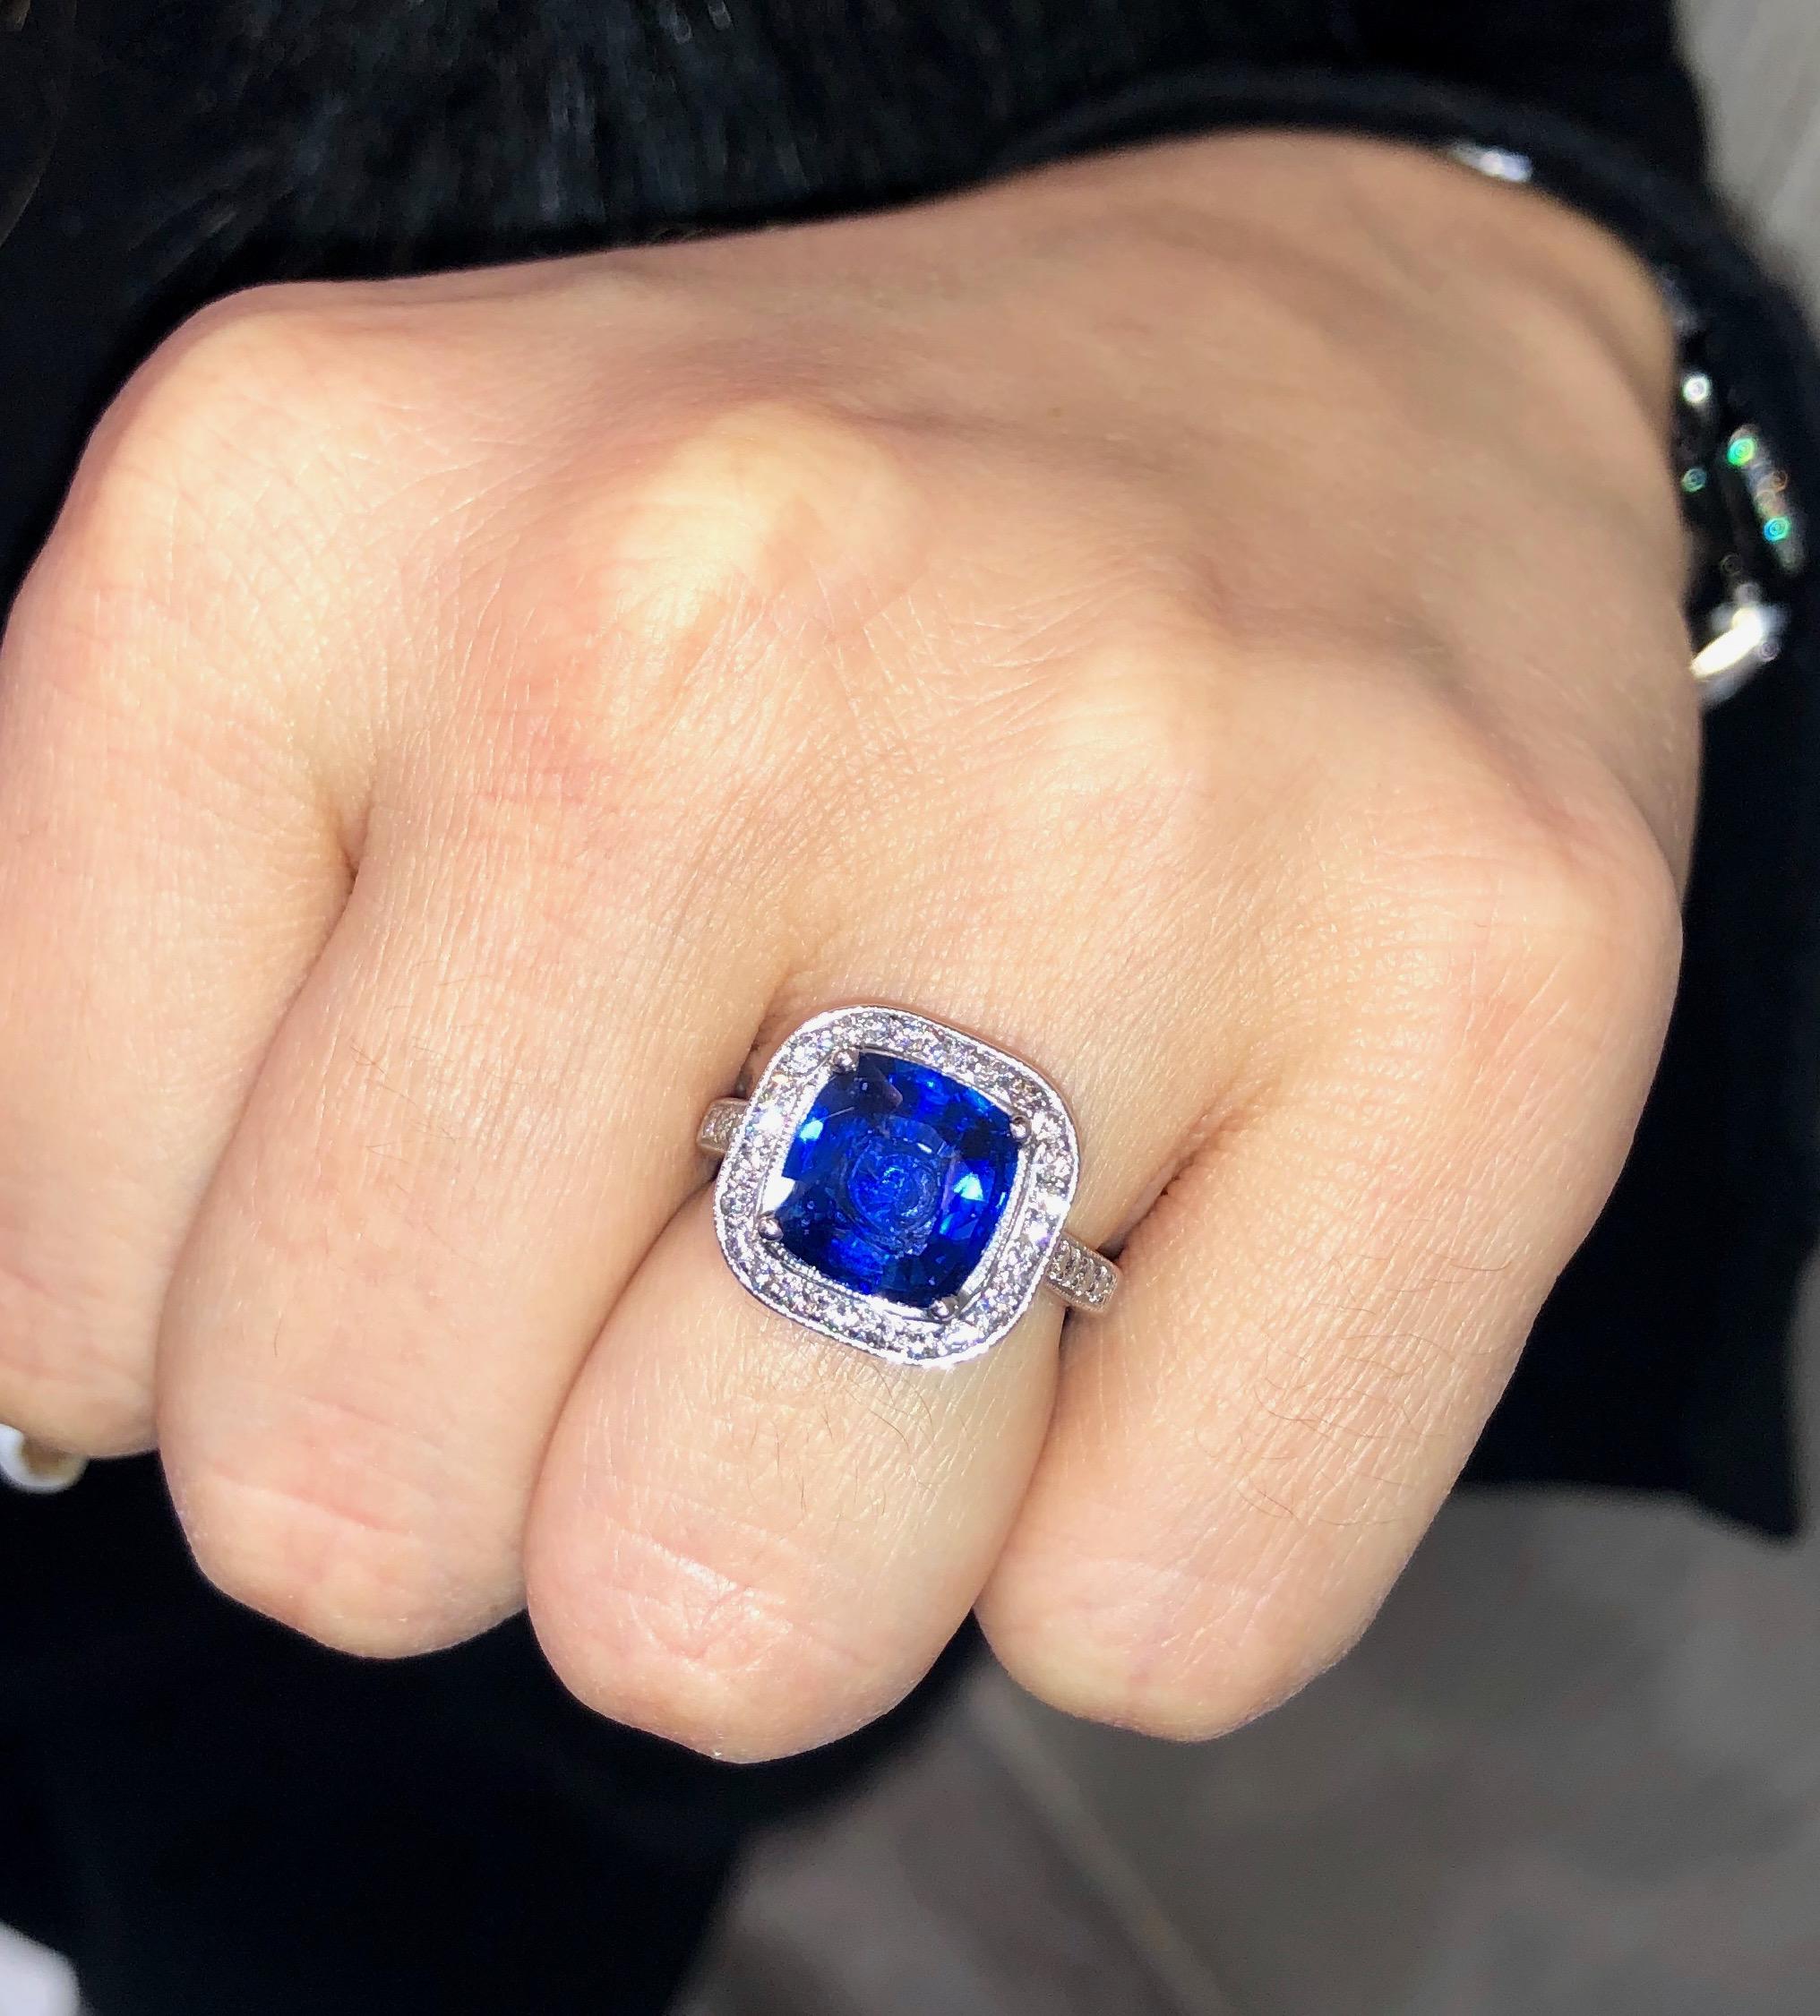    Gorgeous diamond and cushion cut sapphire classic center stone ring with Diamond Halo 
The center contains a 3.41 carat Royal Blue cushion shape sapphire.
The natural sapphire is mounted in a platinum setting surrounded by brilliant cut white